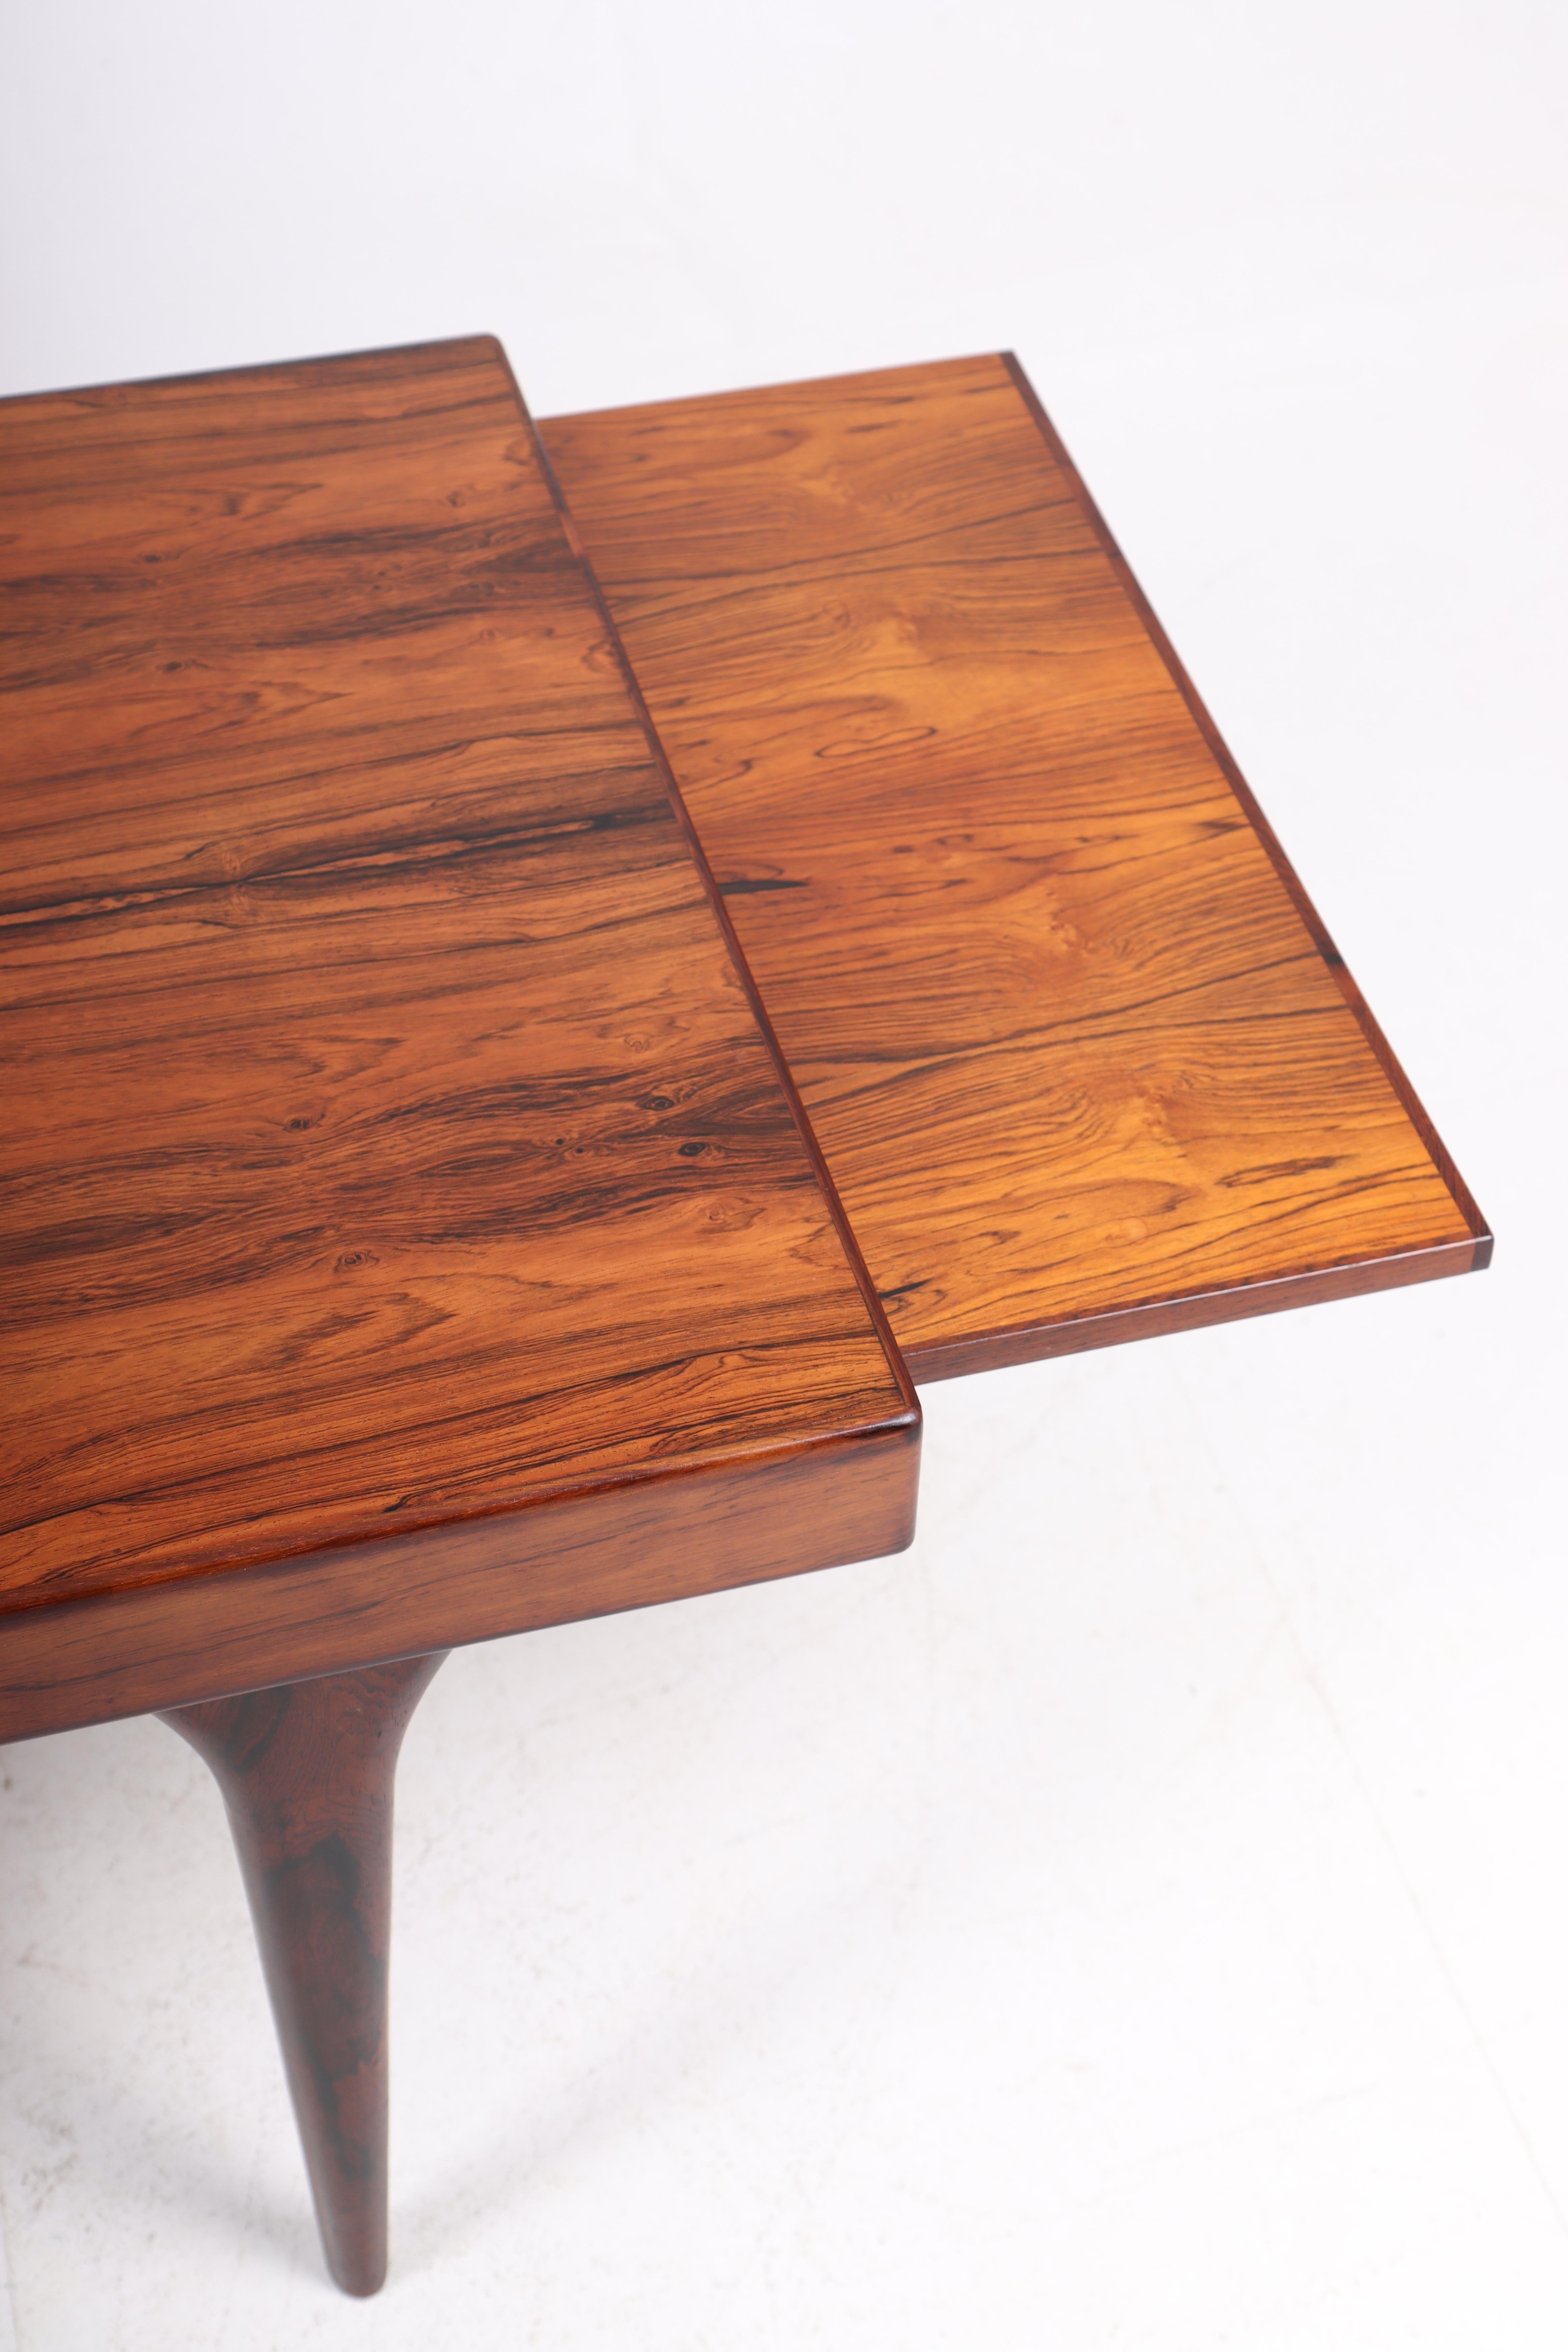 Mid-20th Century Midcentury Low Table in Rosewood, Designed by Johannes Andersen, Danish Design For Sale